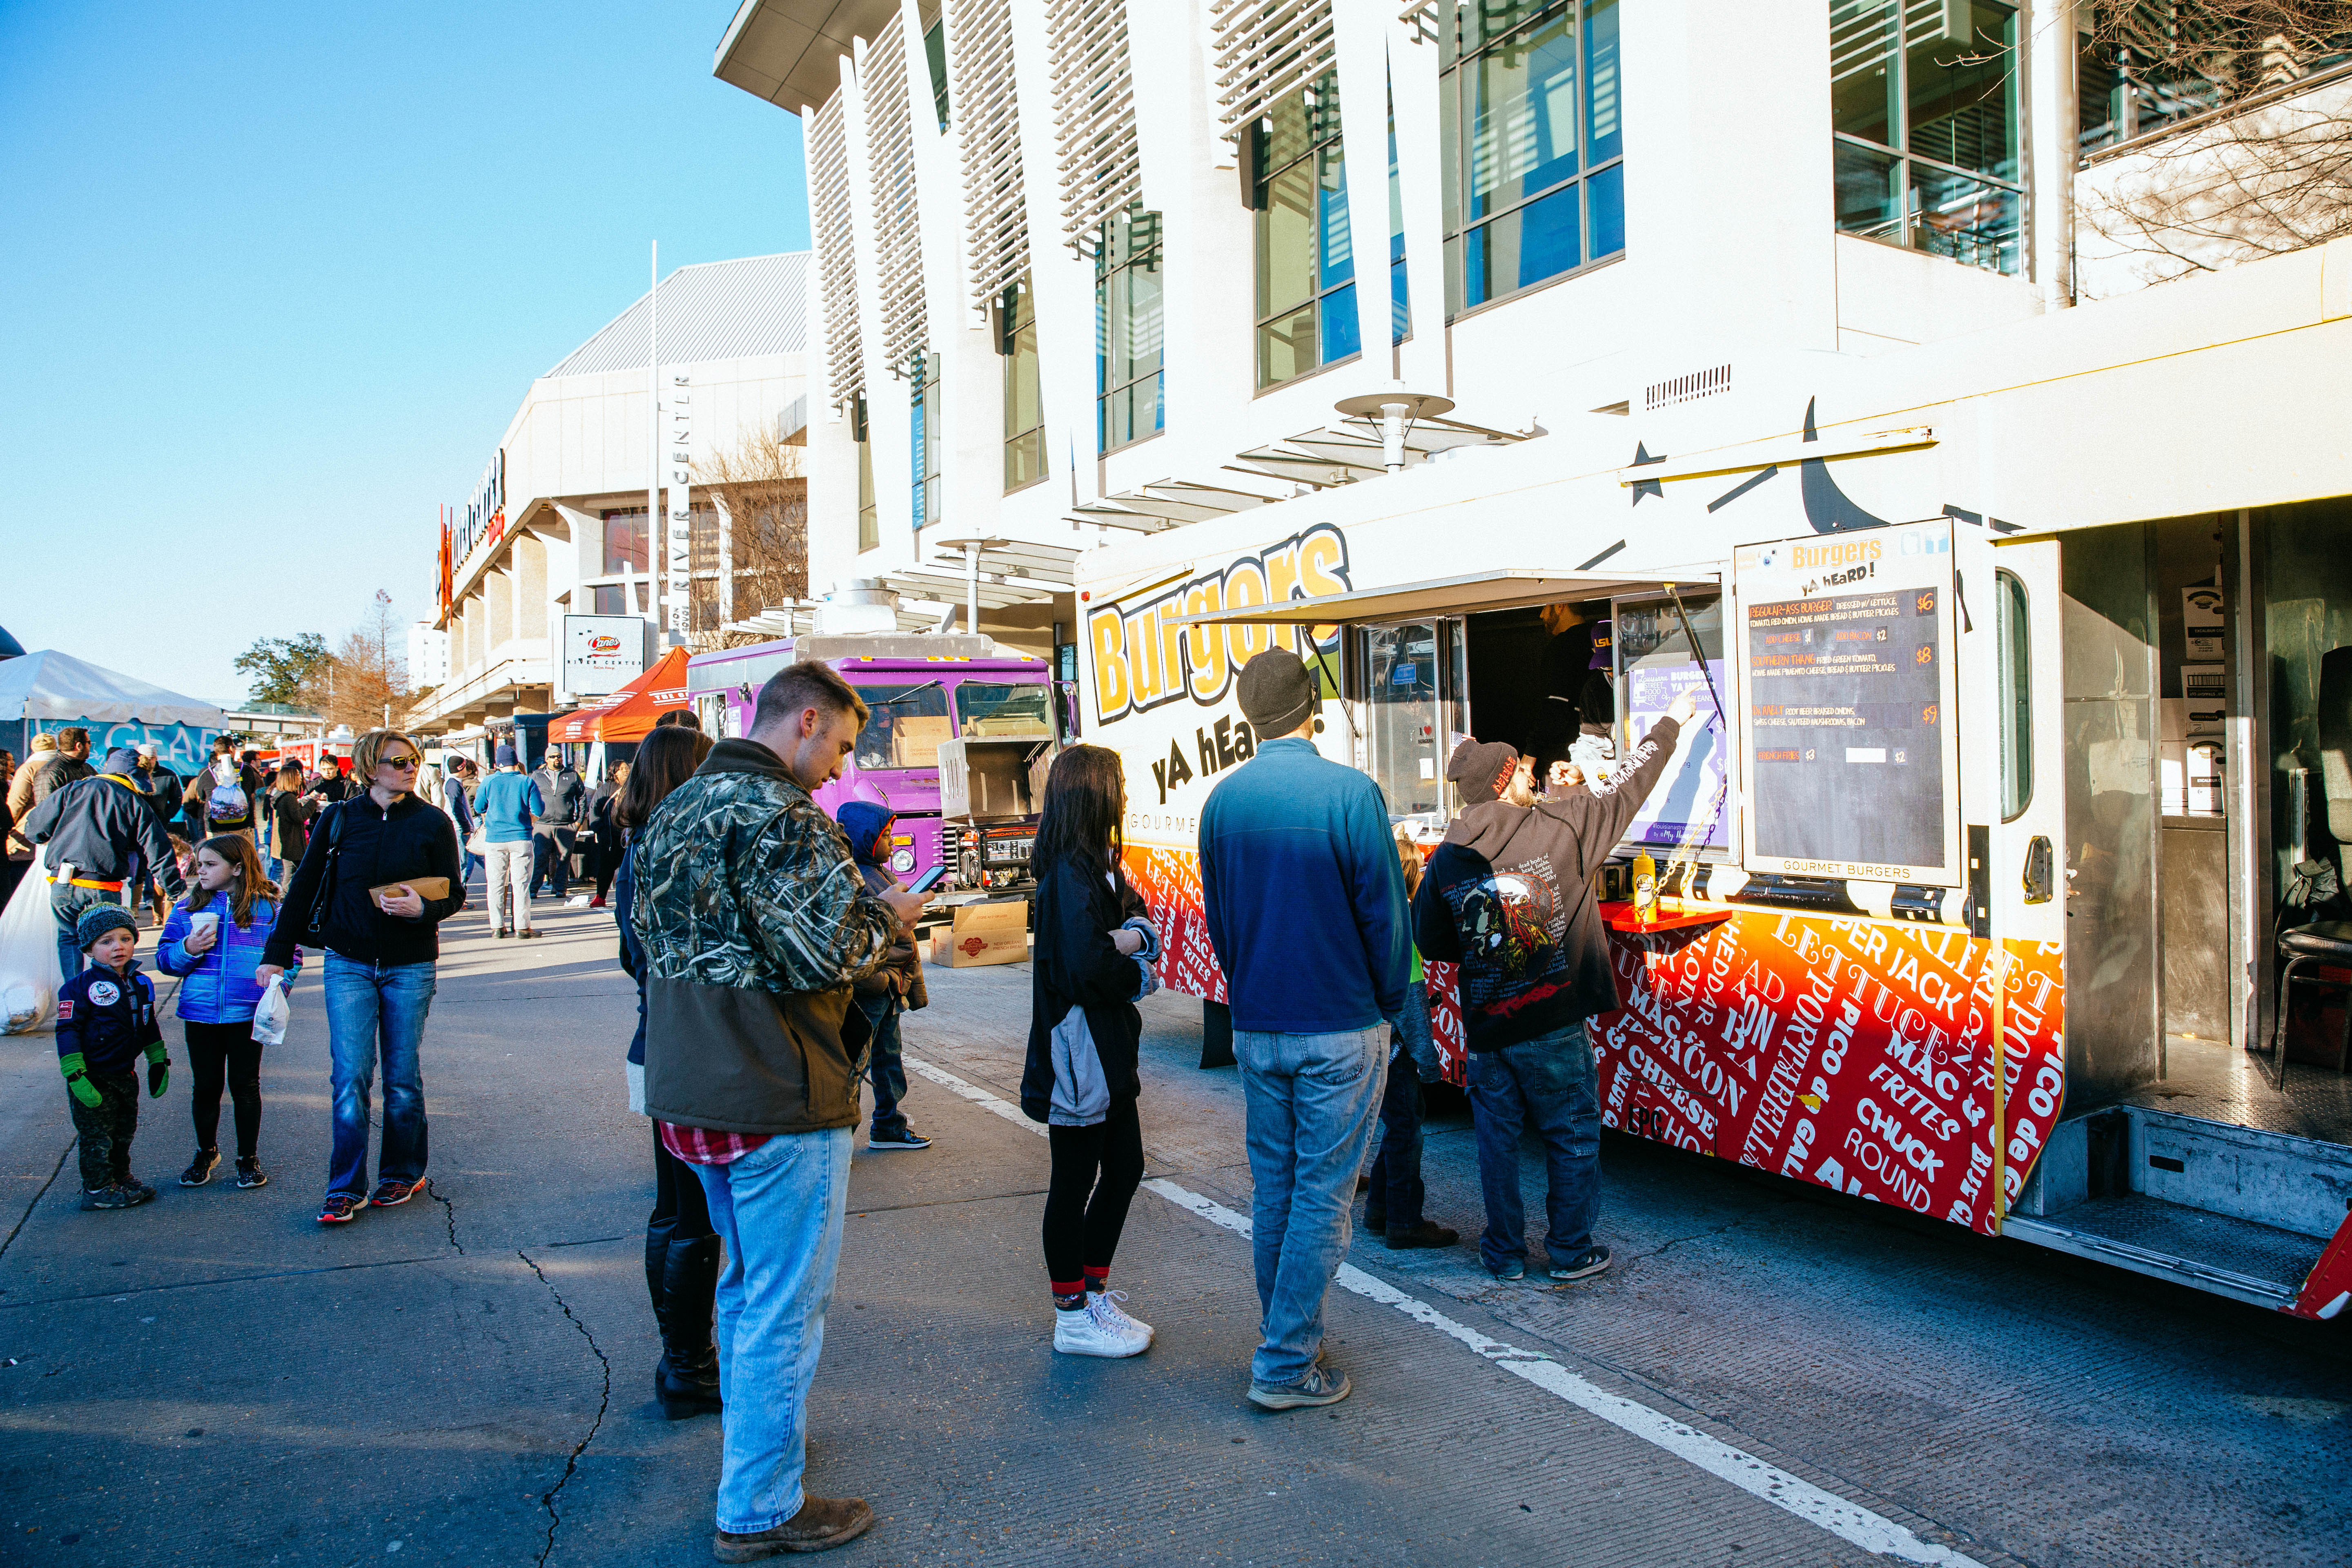 Run a race then fill up at the Louisiana Street Food Festival this weekend